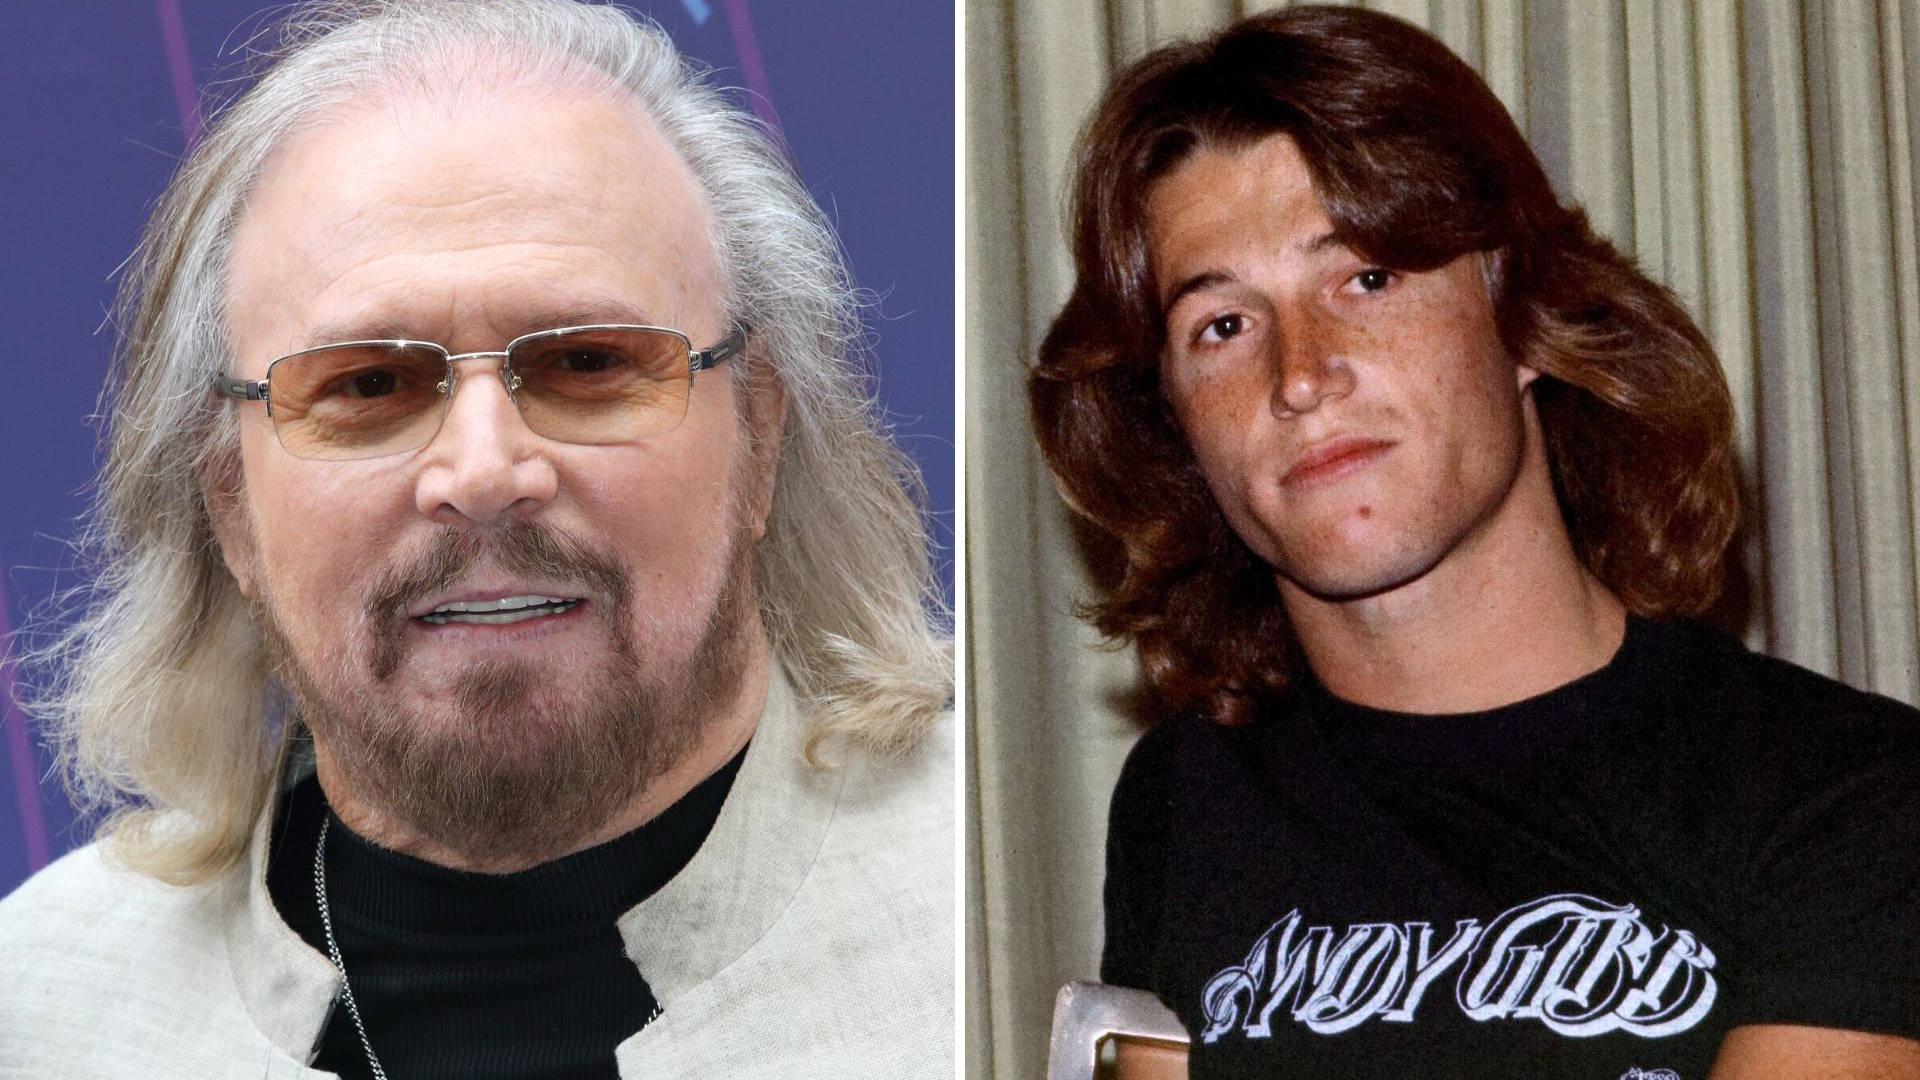 Bee gees member barry gibb and wife linda claim to have seen ghosts of robin and andy